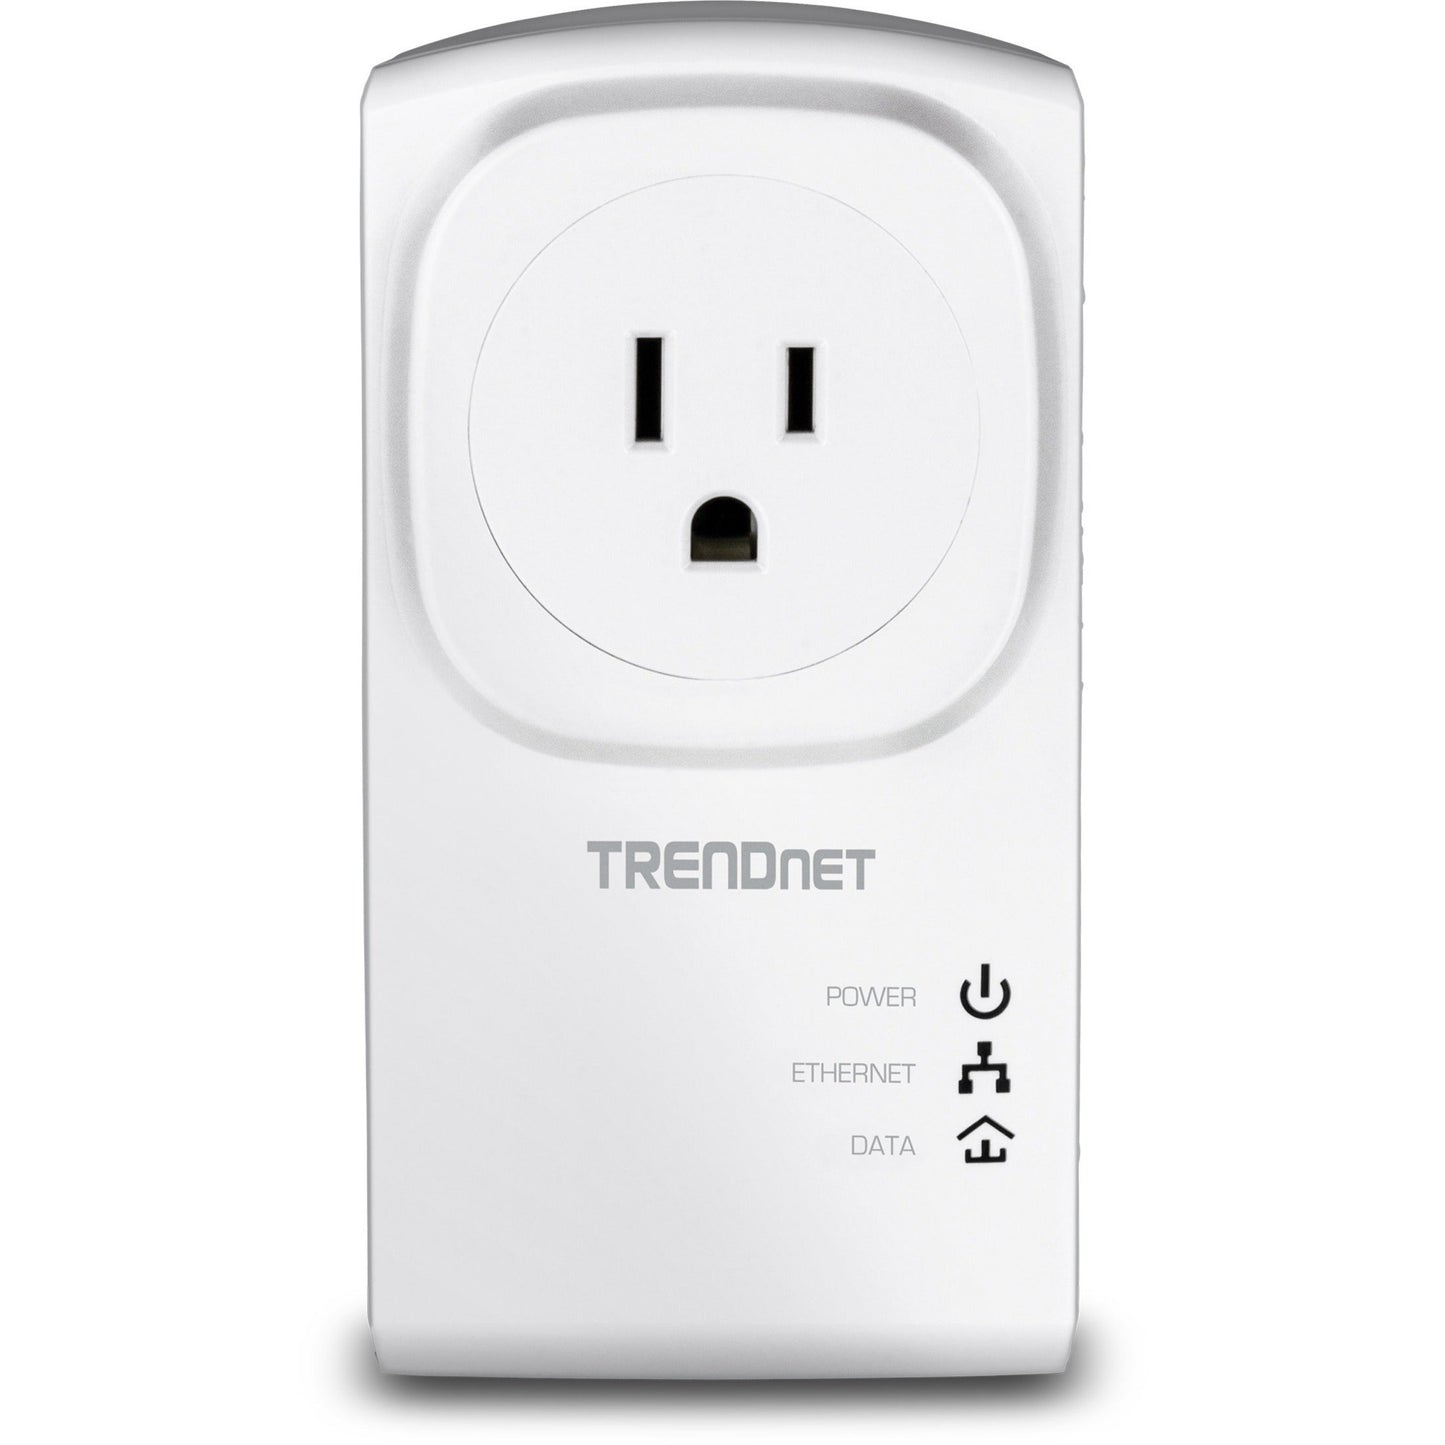 TRENDnet Powerline 500 AV Nano Adapter Kit With Built-In Outlet Power Outlet Pass-Through Includes 2 x TPL-407E Adapters Plug & Play Ideal For Smart TVs Gaming White TPL-407E2K